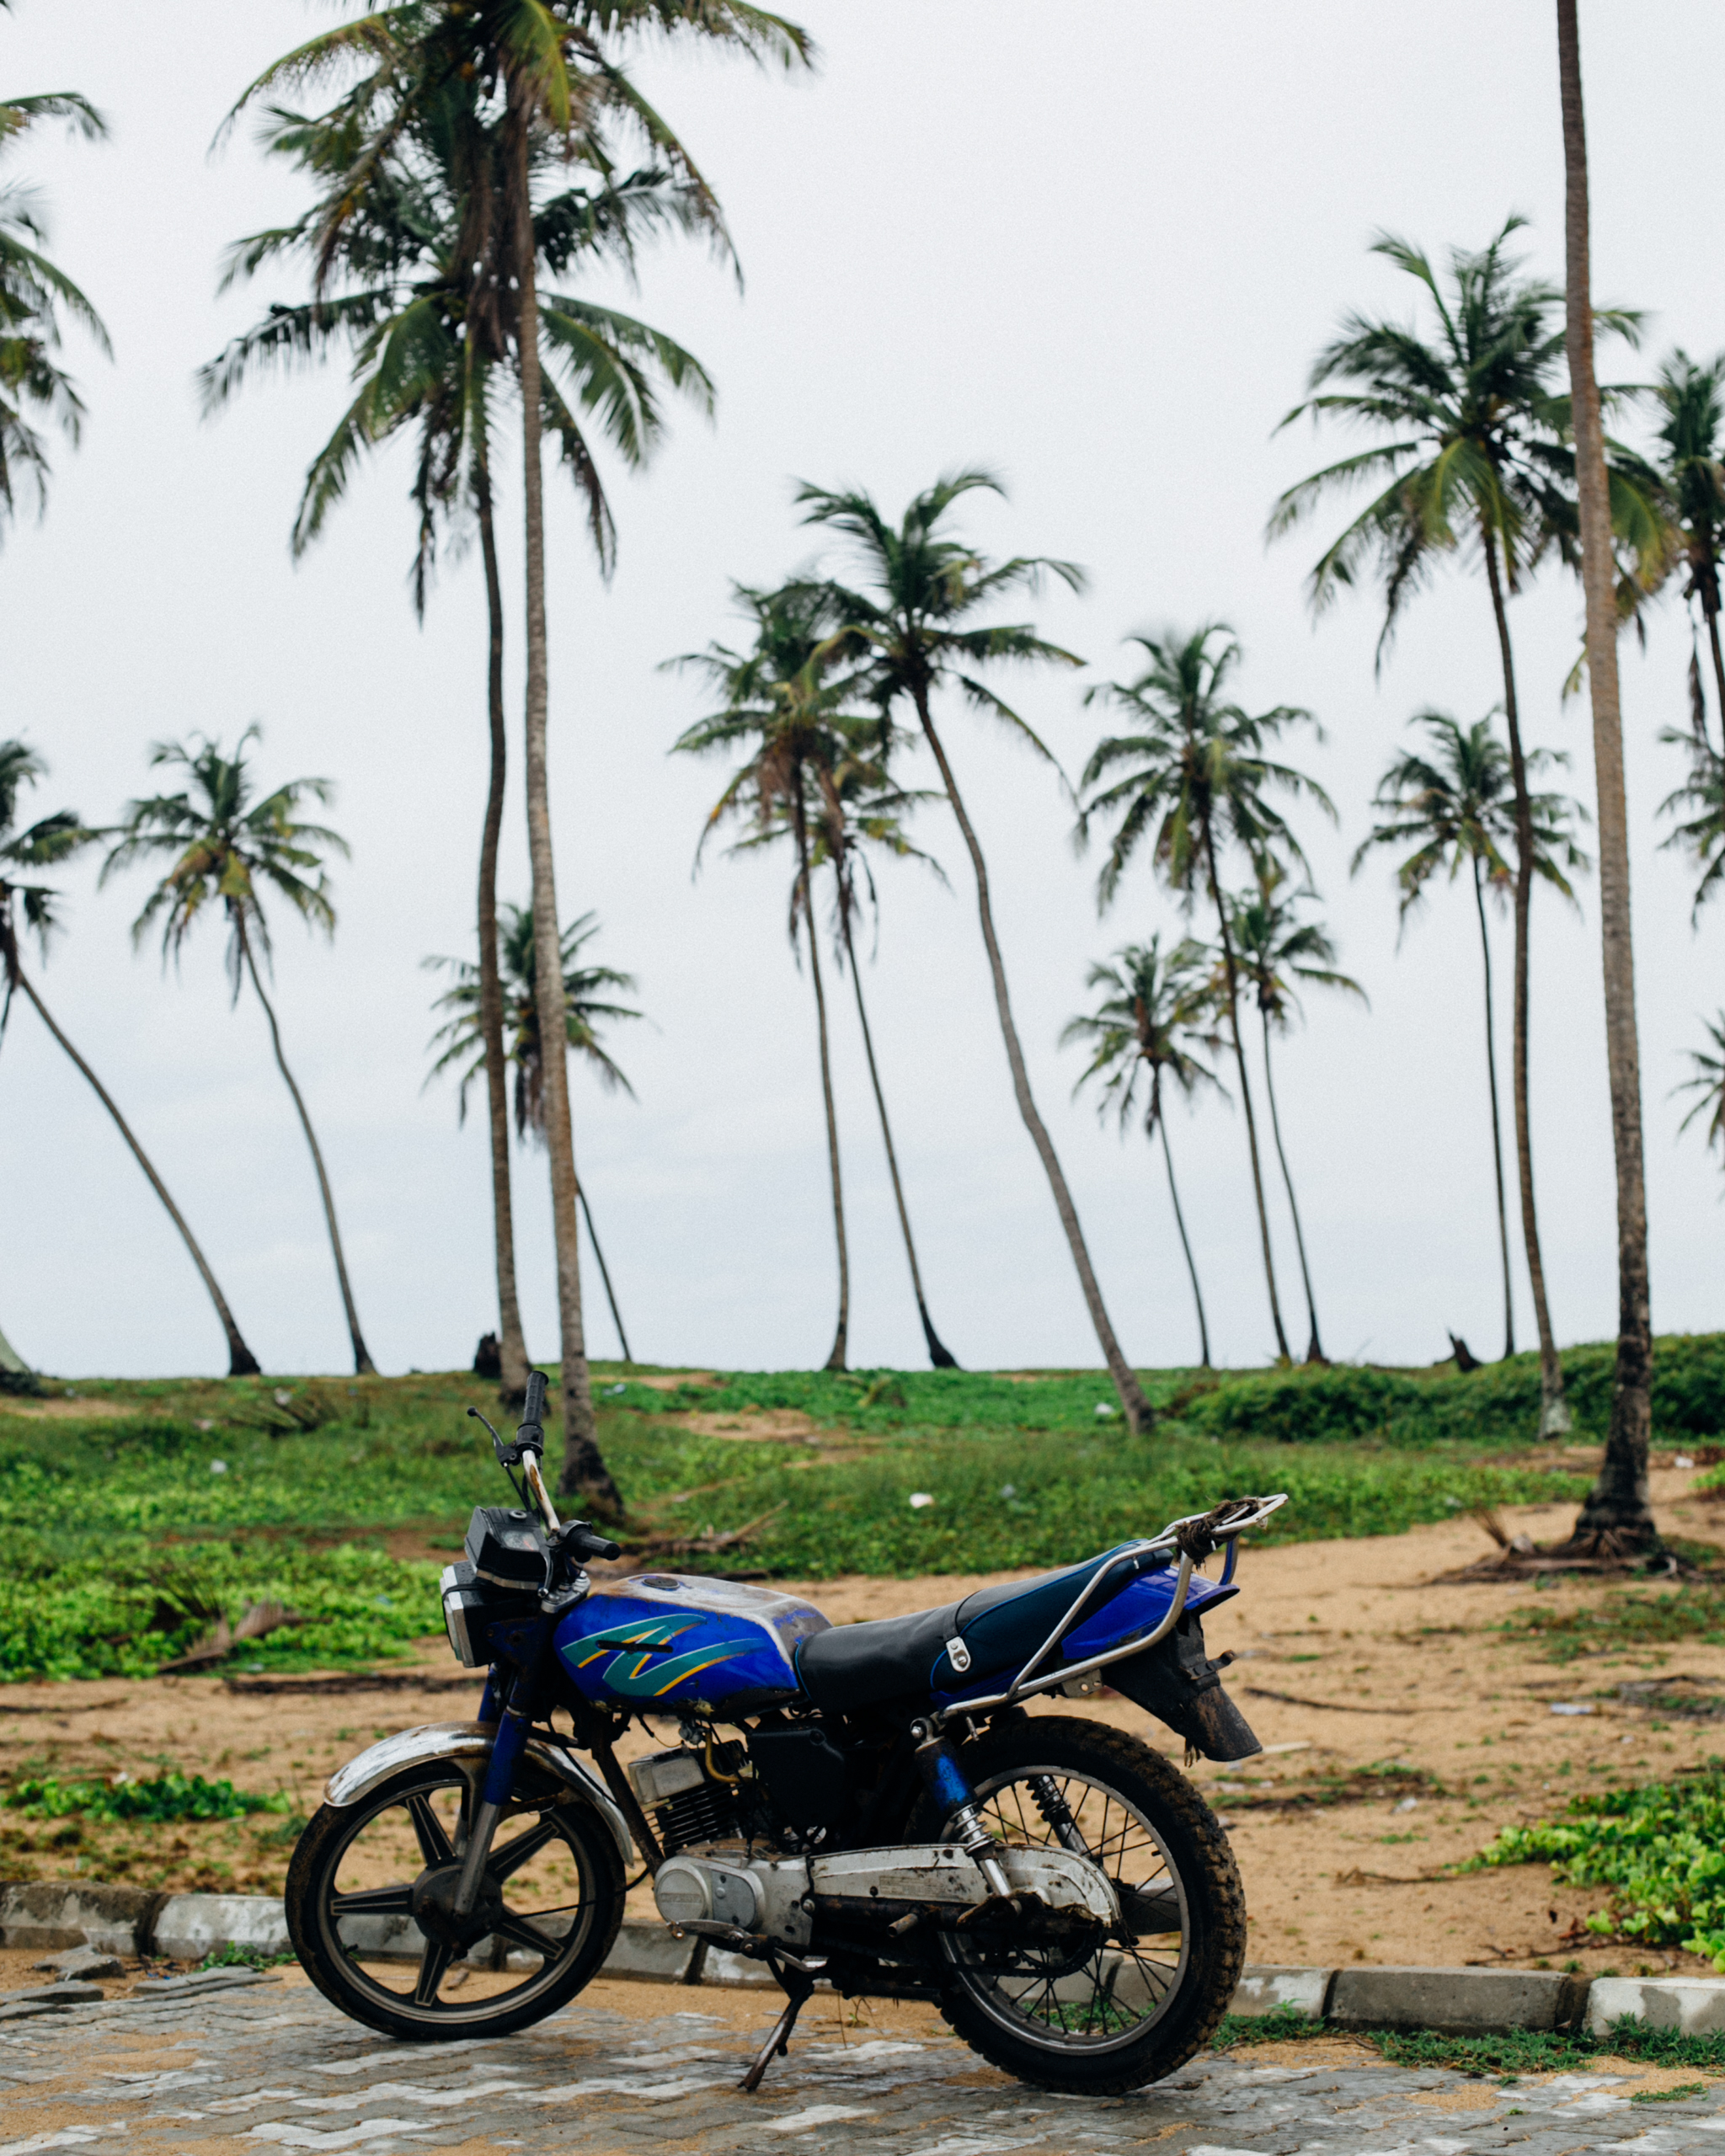 Motorcycle and Coconut Trees, Badagry